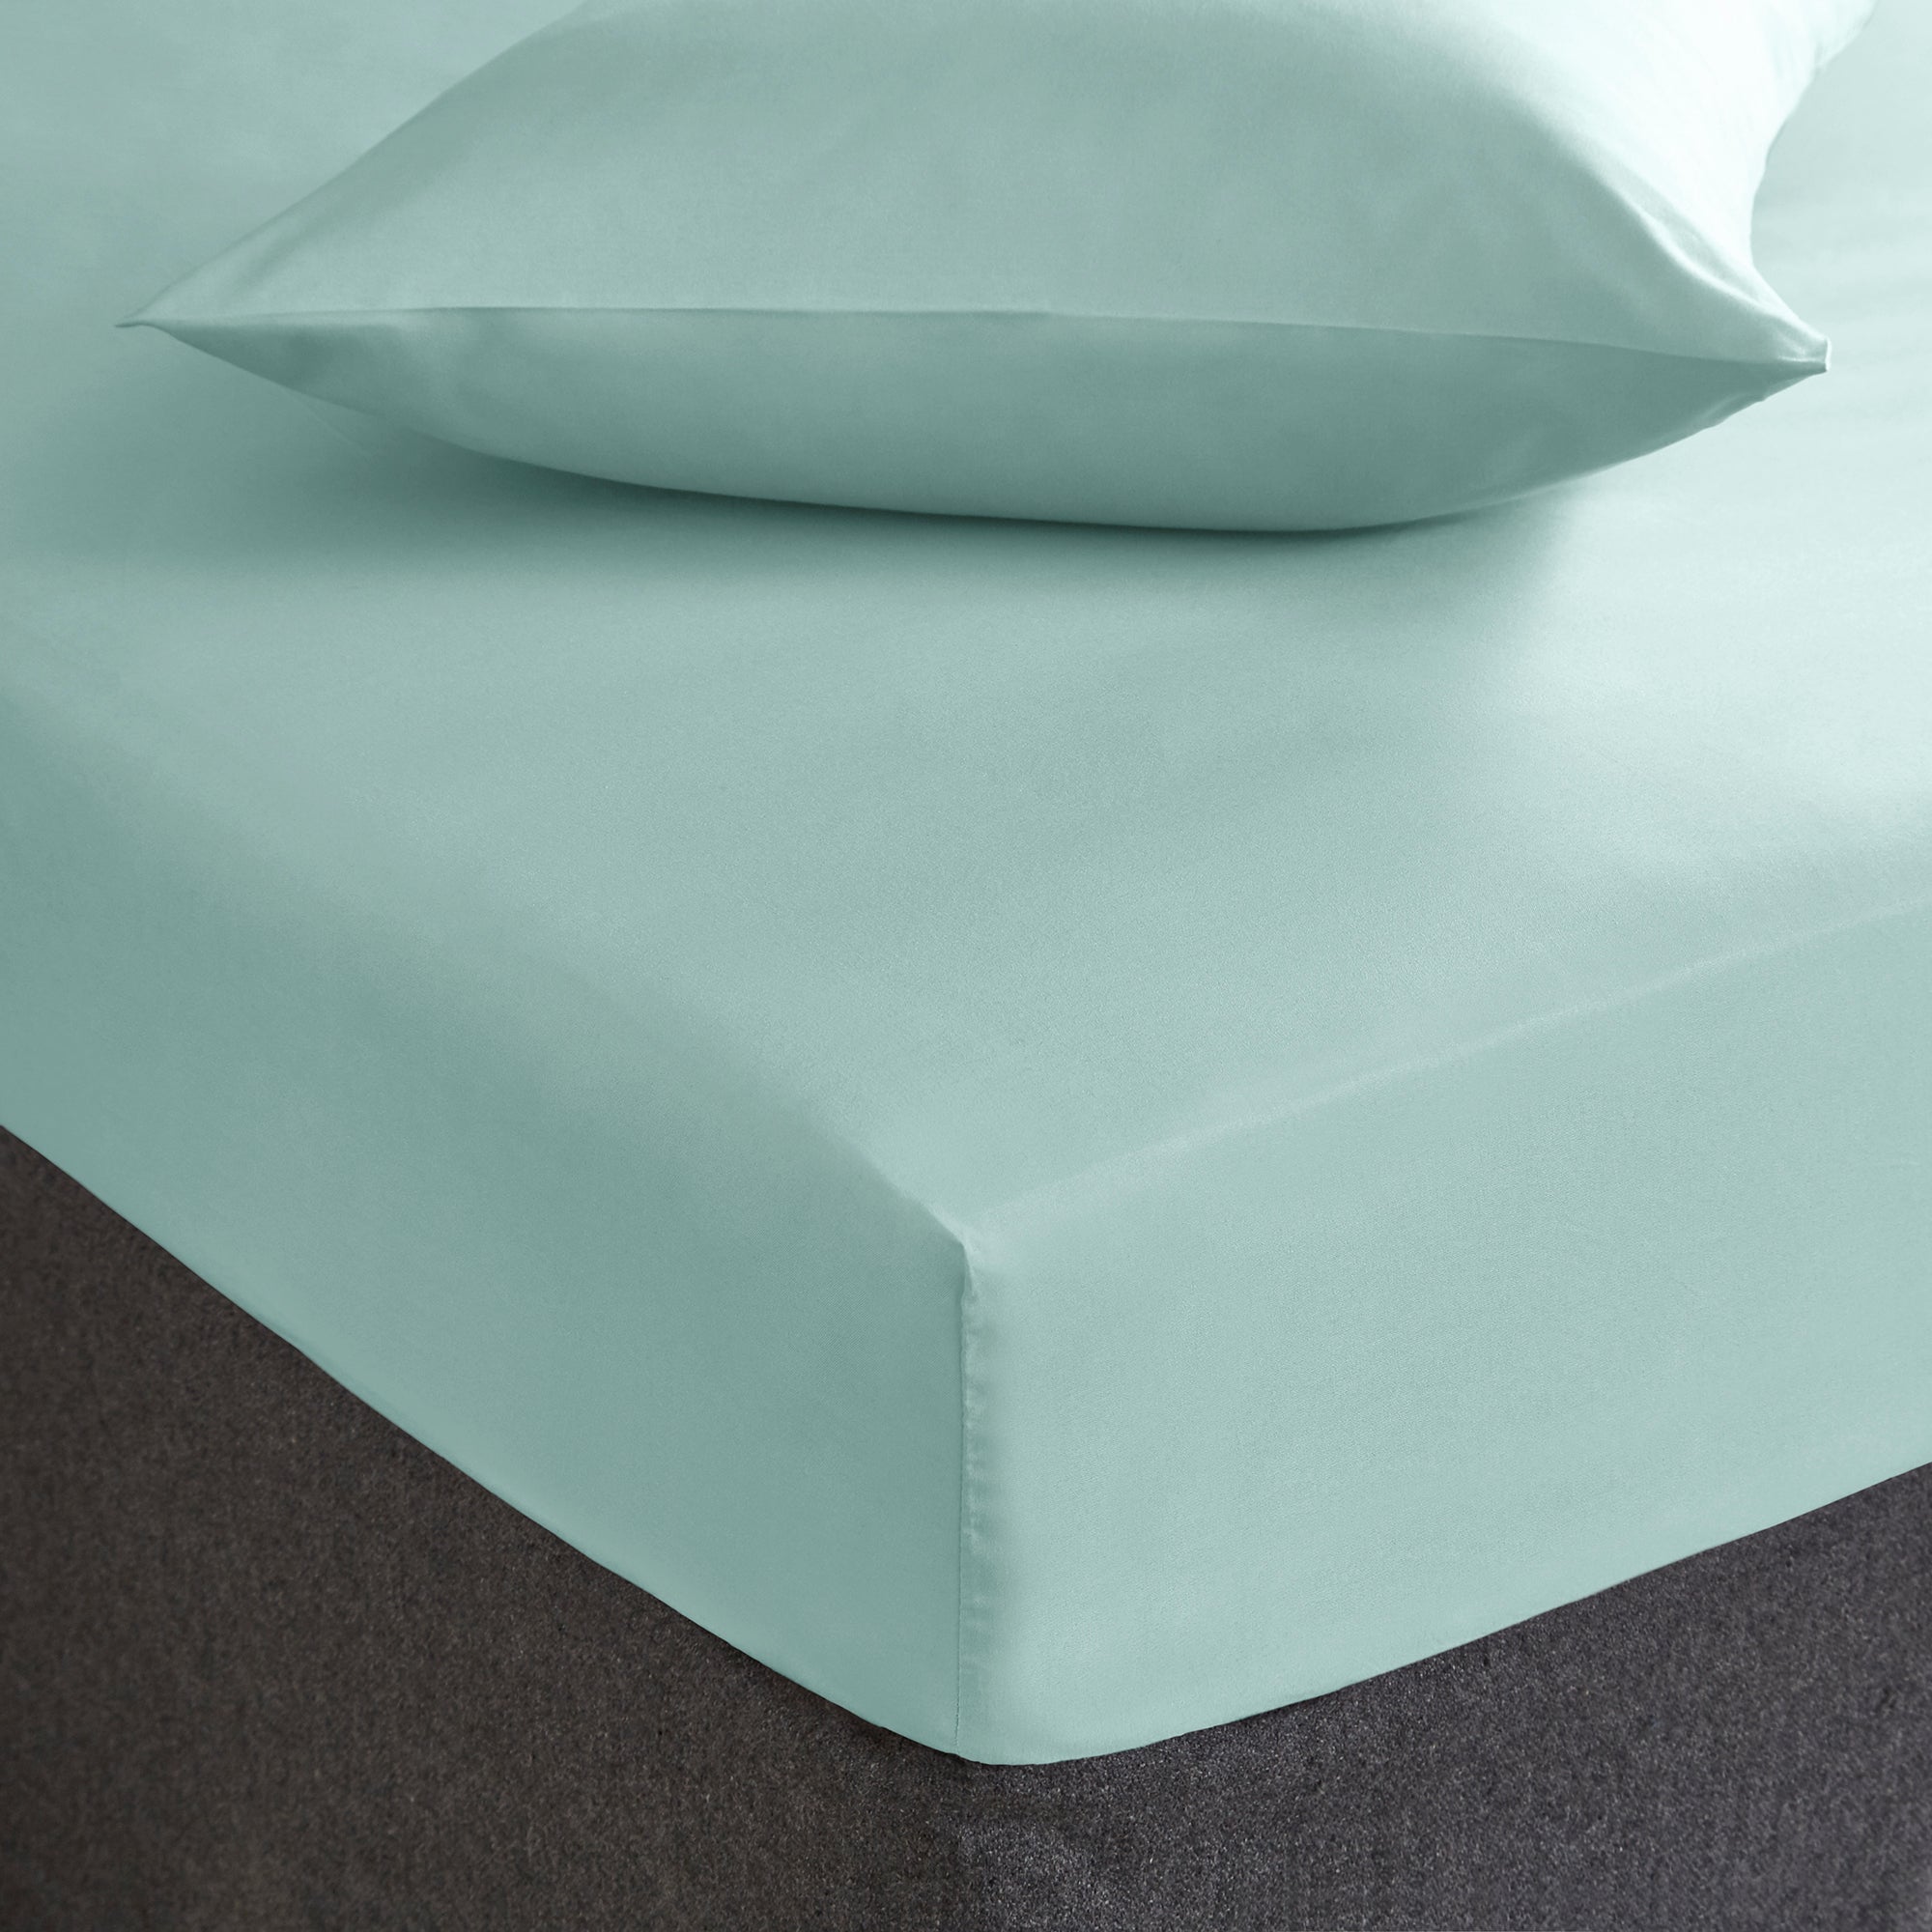 Fogarty Soft Touch Fitted Sheet